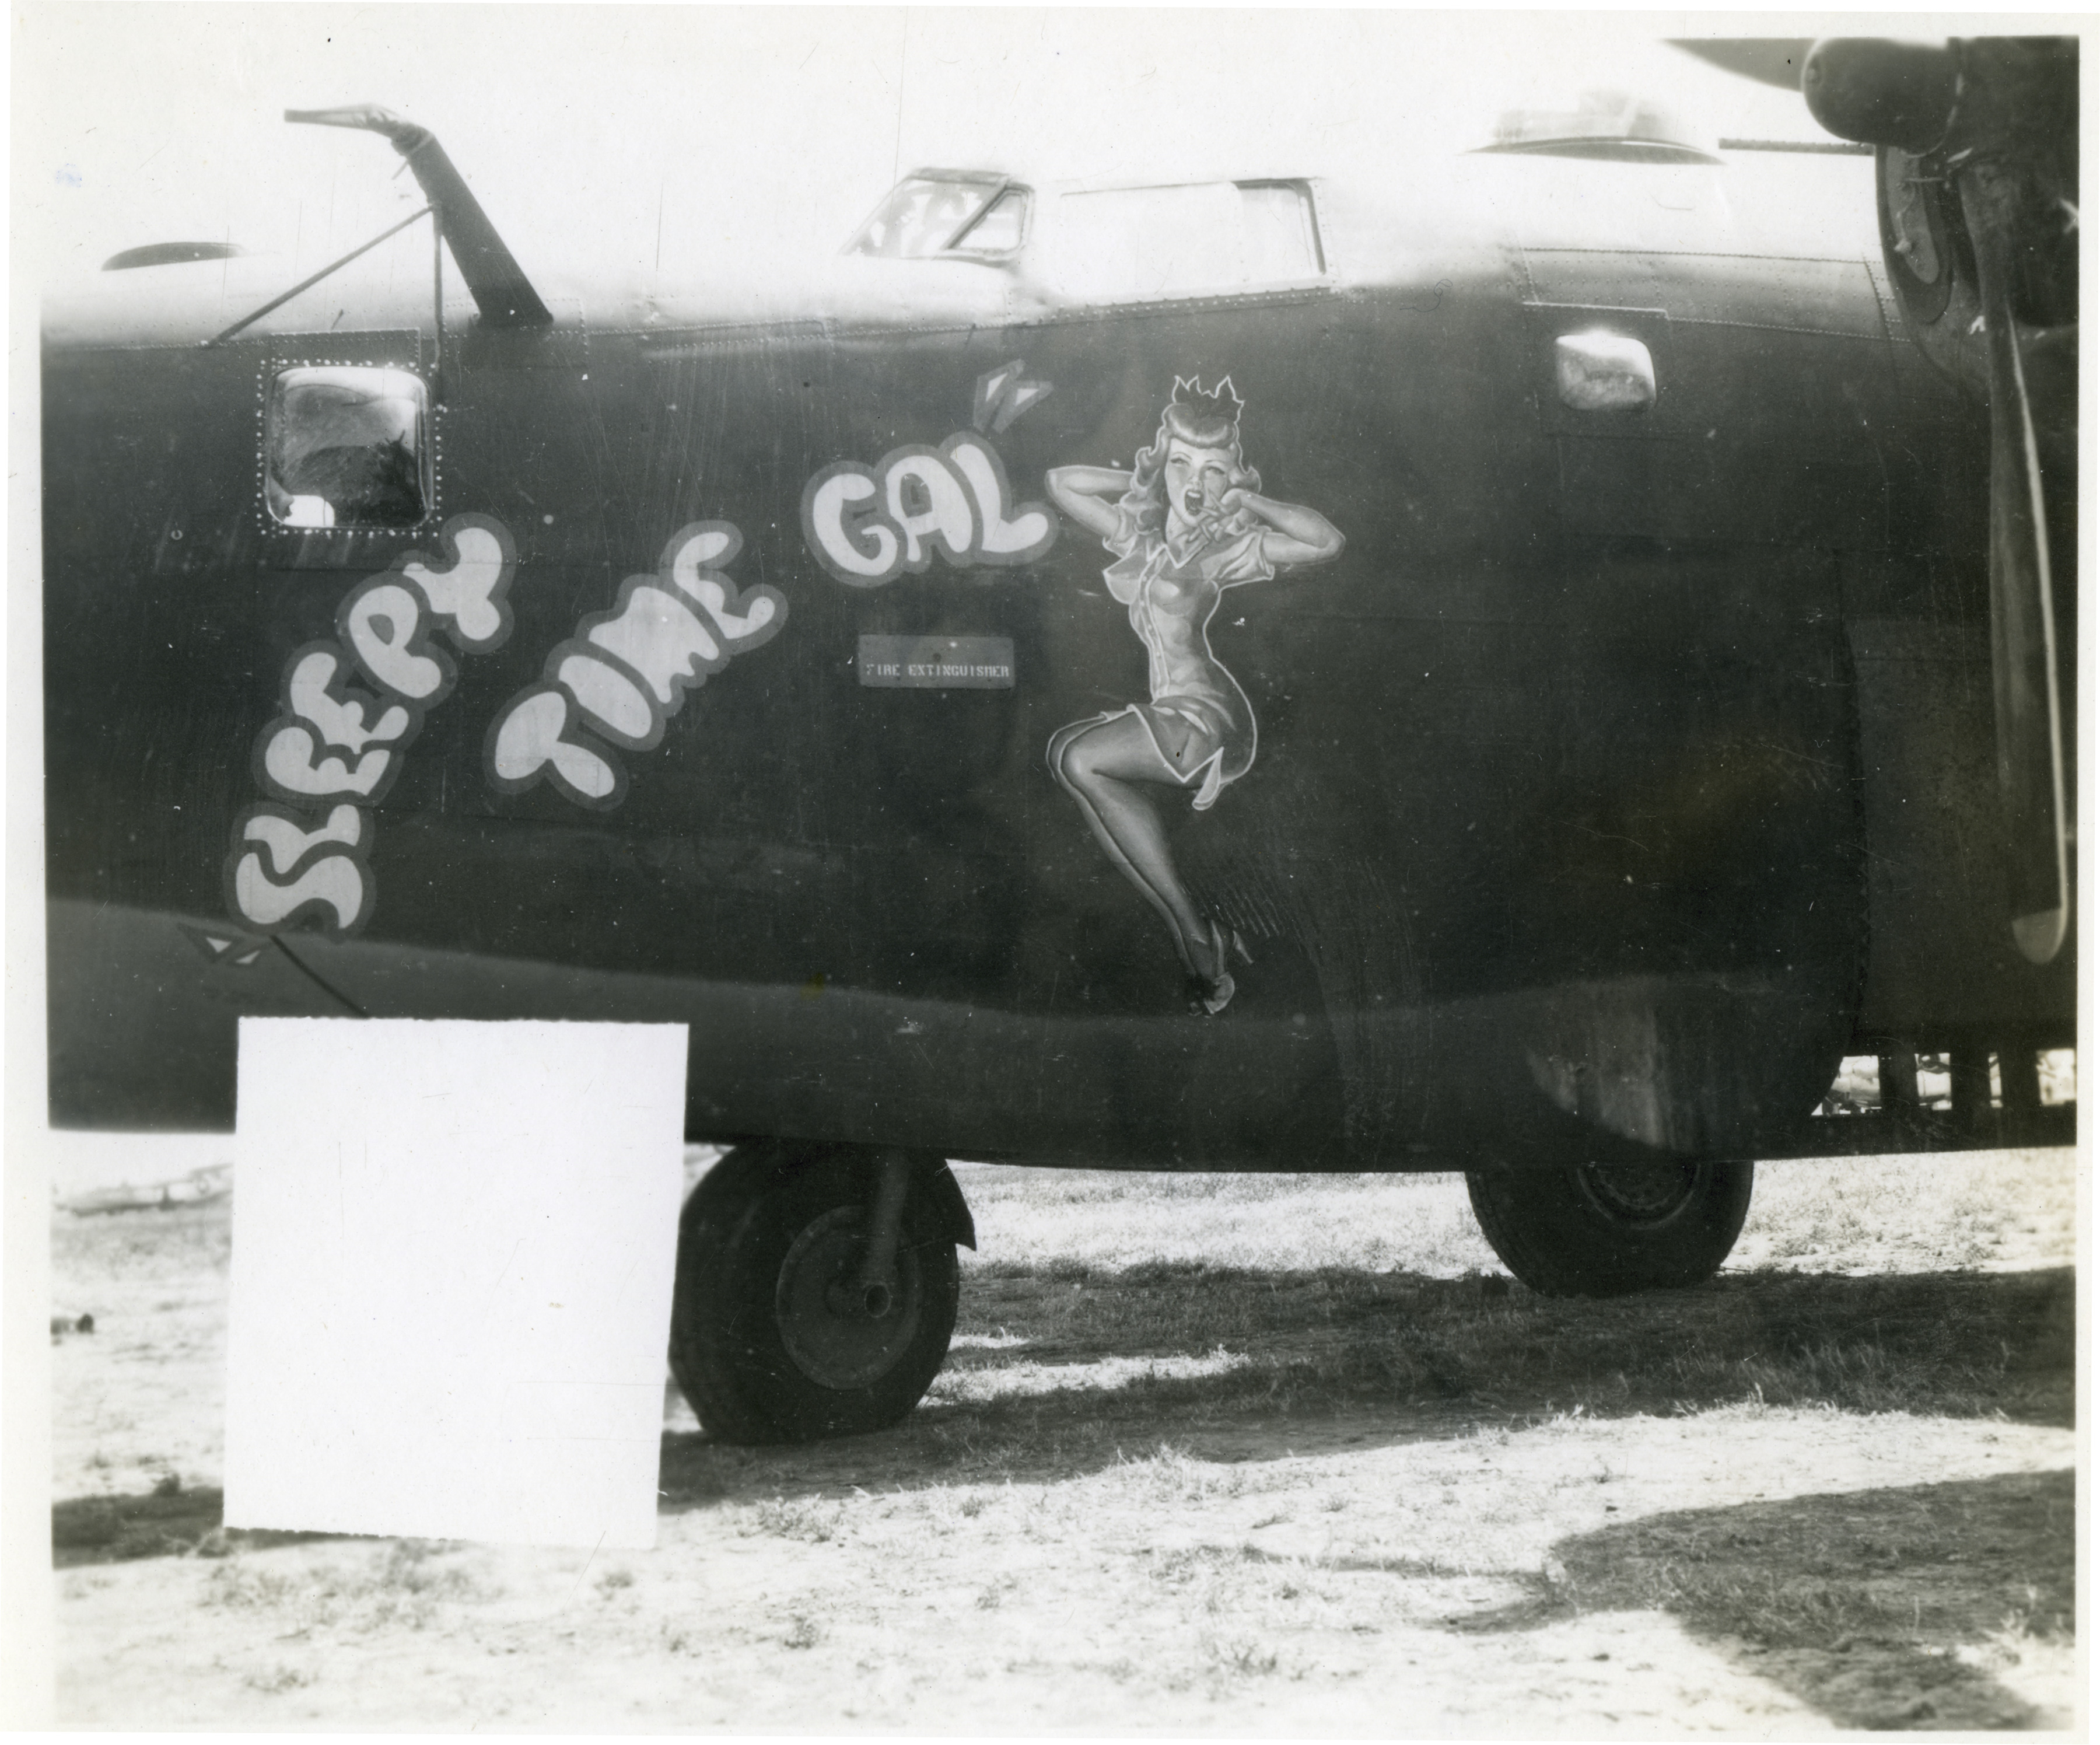 B-24 nose art from 776th Bombardment Squadron in Italy | The Digital ...